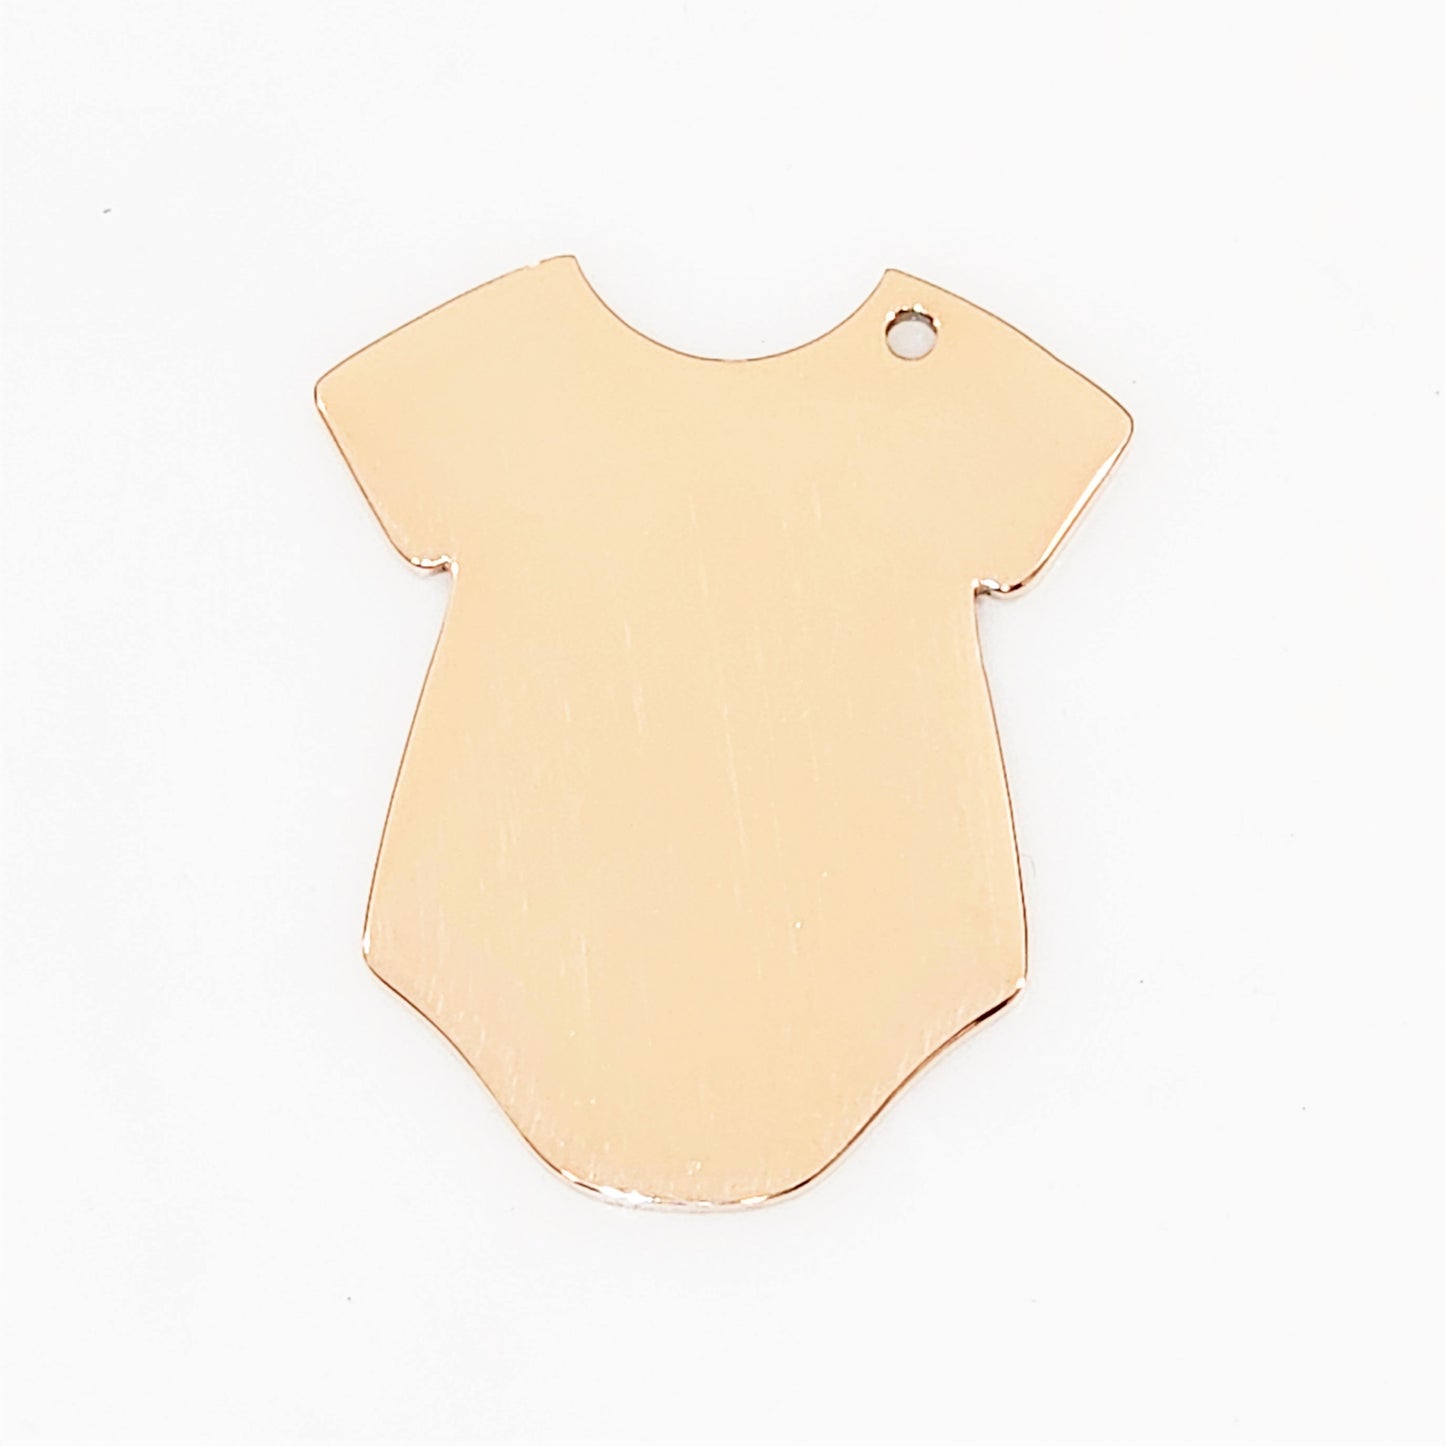 Rose Gold Plated Onesie Charm - 26mm x 30mm